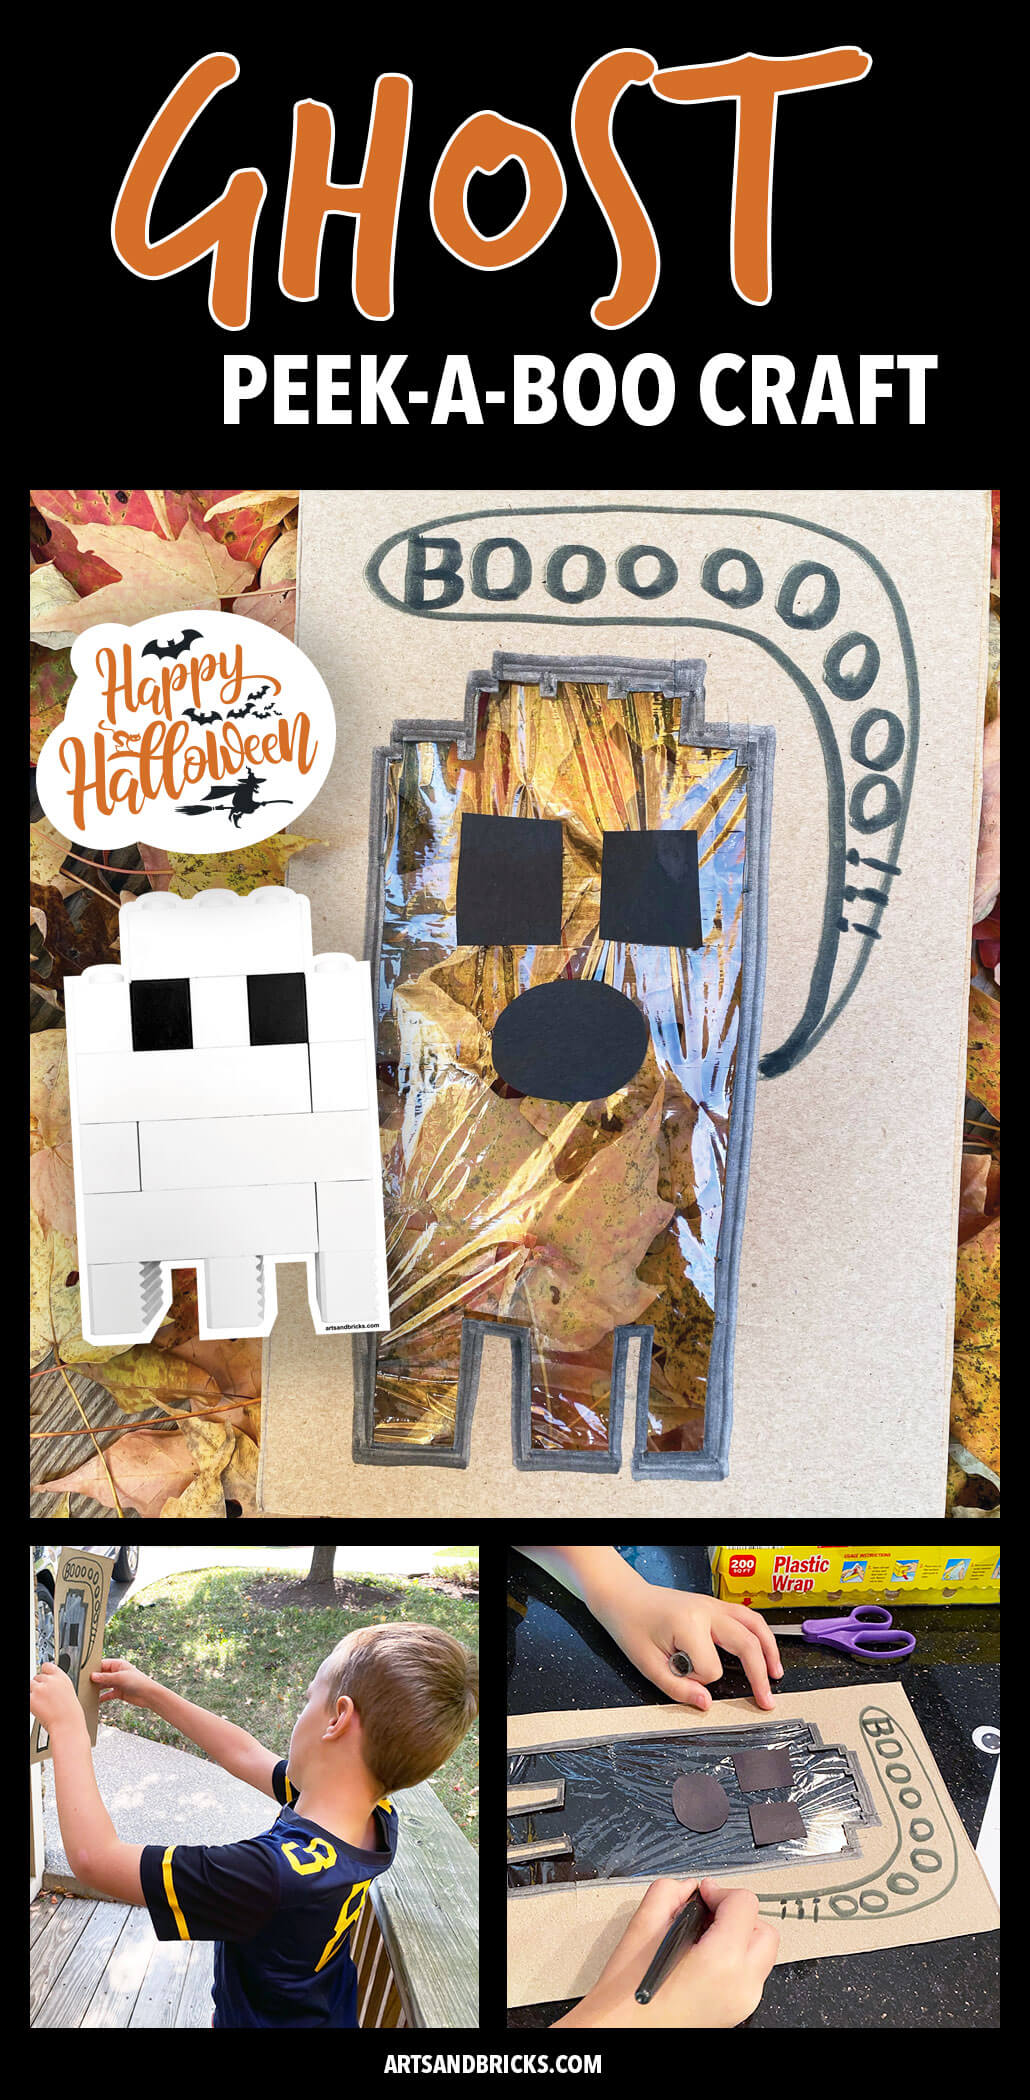 Our Ghost Peek-A-Boo Cardboard Craft was especially created for a LEGO lovin' eight-year-old. We recycled our cereal boxes for the cardboard and used construction paper and plastic wrap. Our ghost is a Lego brick ghost! This craft encourages kids to explore nature and the vast amount of colors and textures that surround them. Bonus for older kids: it starts to teach how to frame a composition.
#ghost #craft #forkids #autumn #halloween #lego 